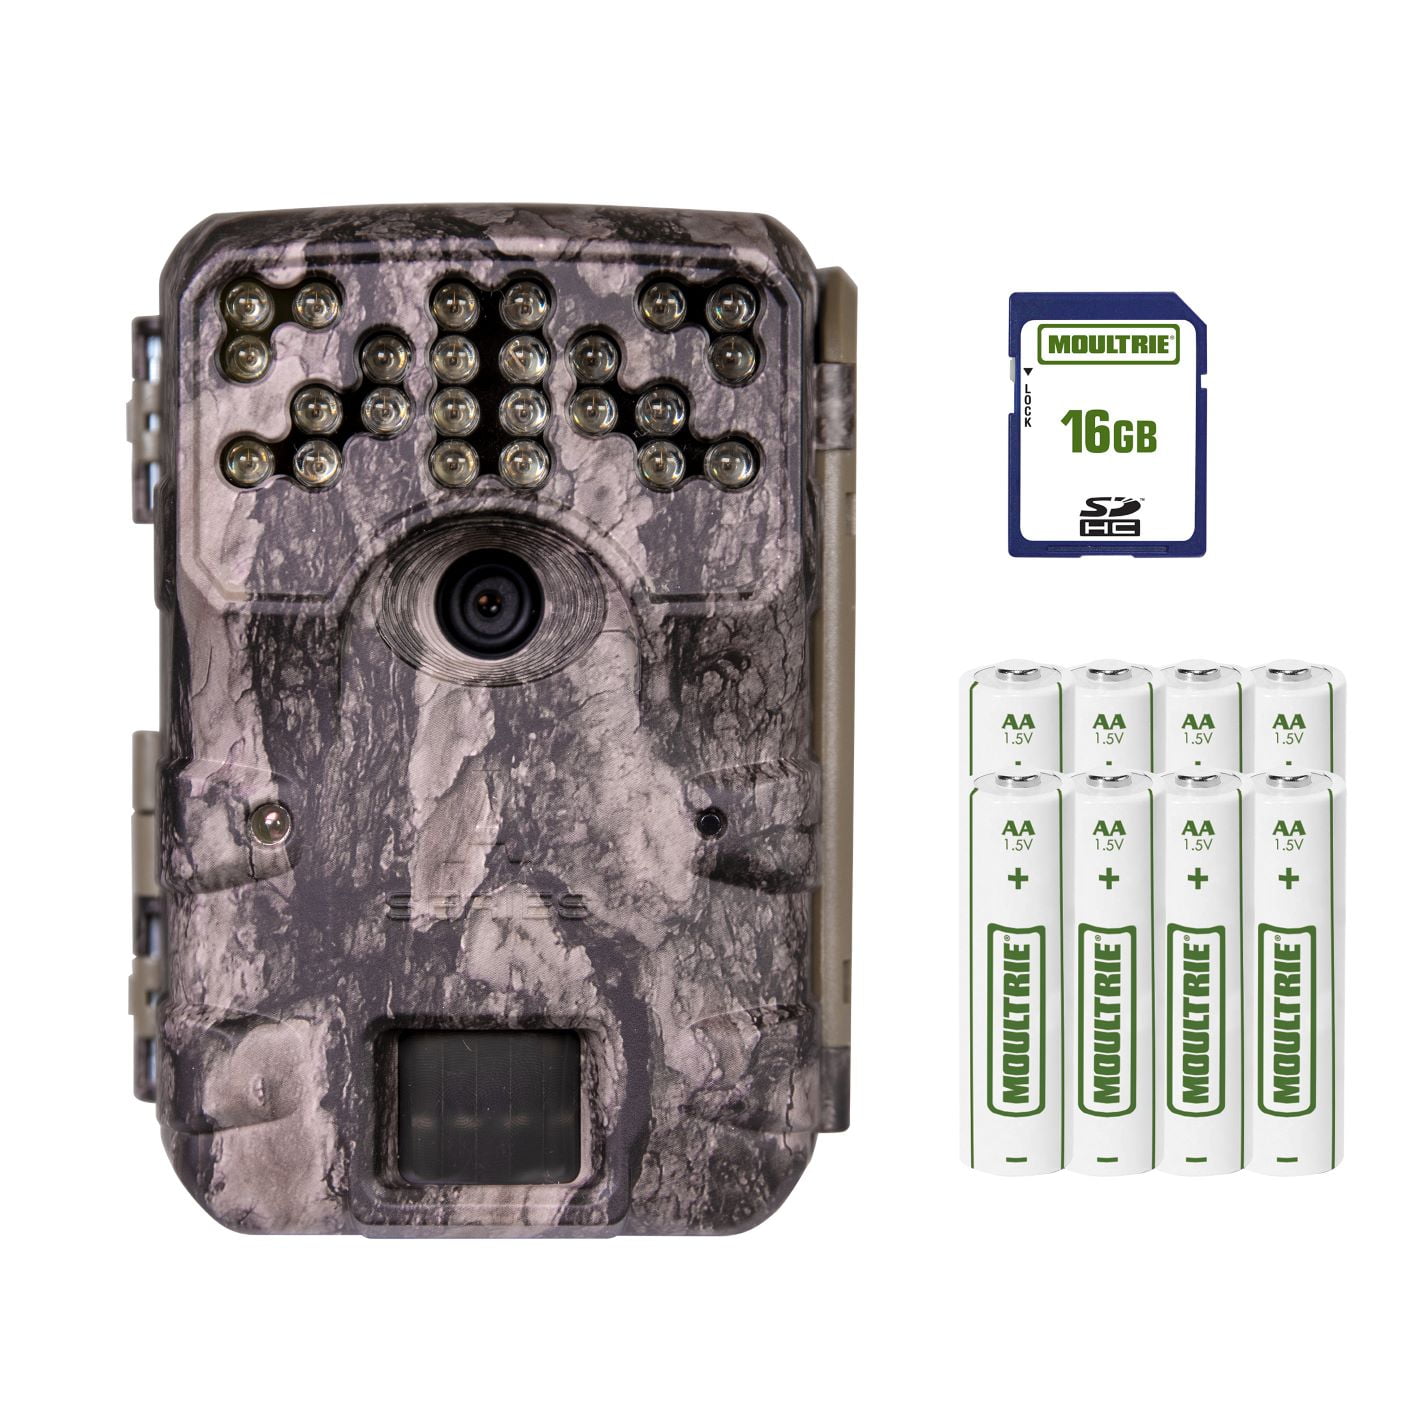 MCG13483 for sale online Moultrie W400 Infrared Hunting Trail Camera 